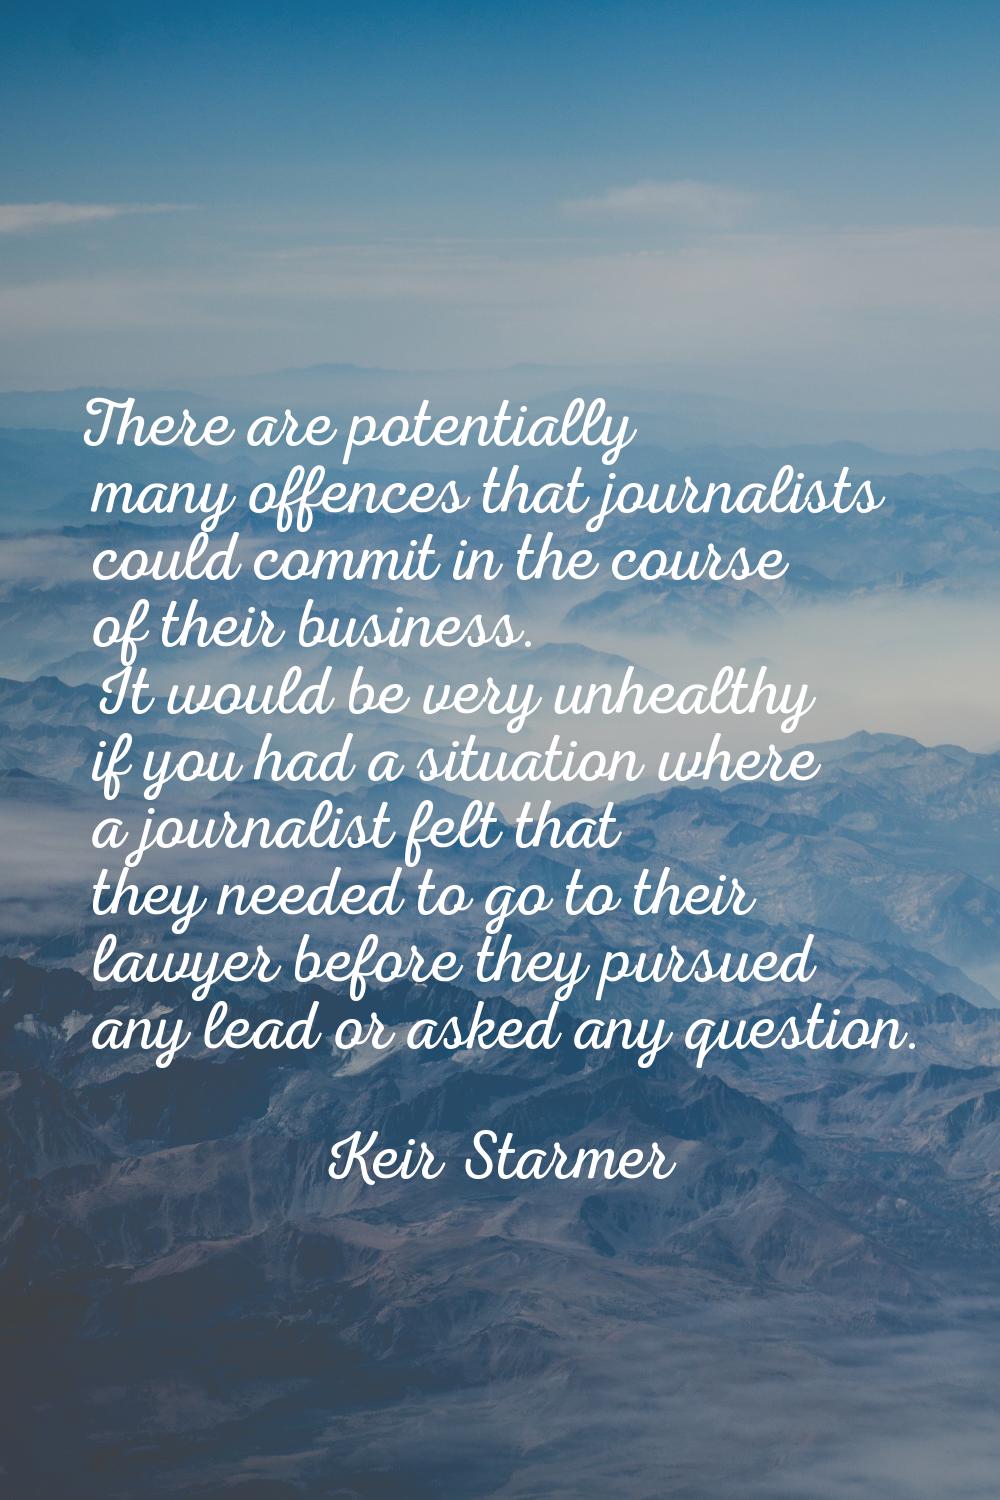 There are potentially many offences that journalists could commit in the course of their business. 